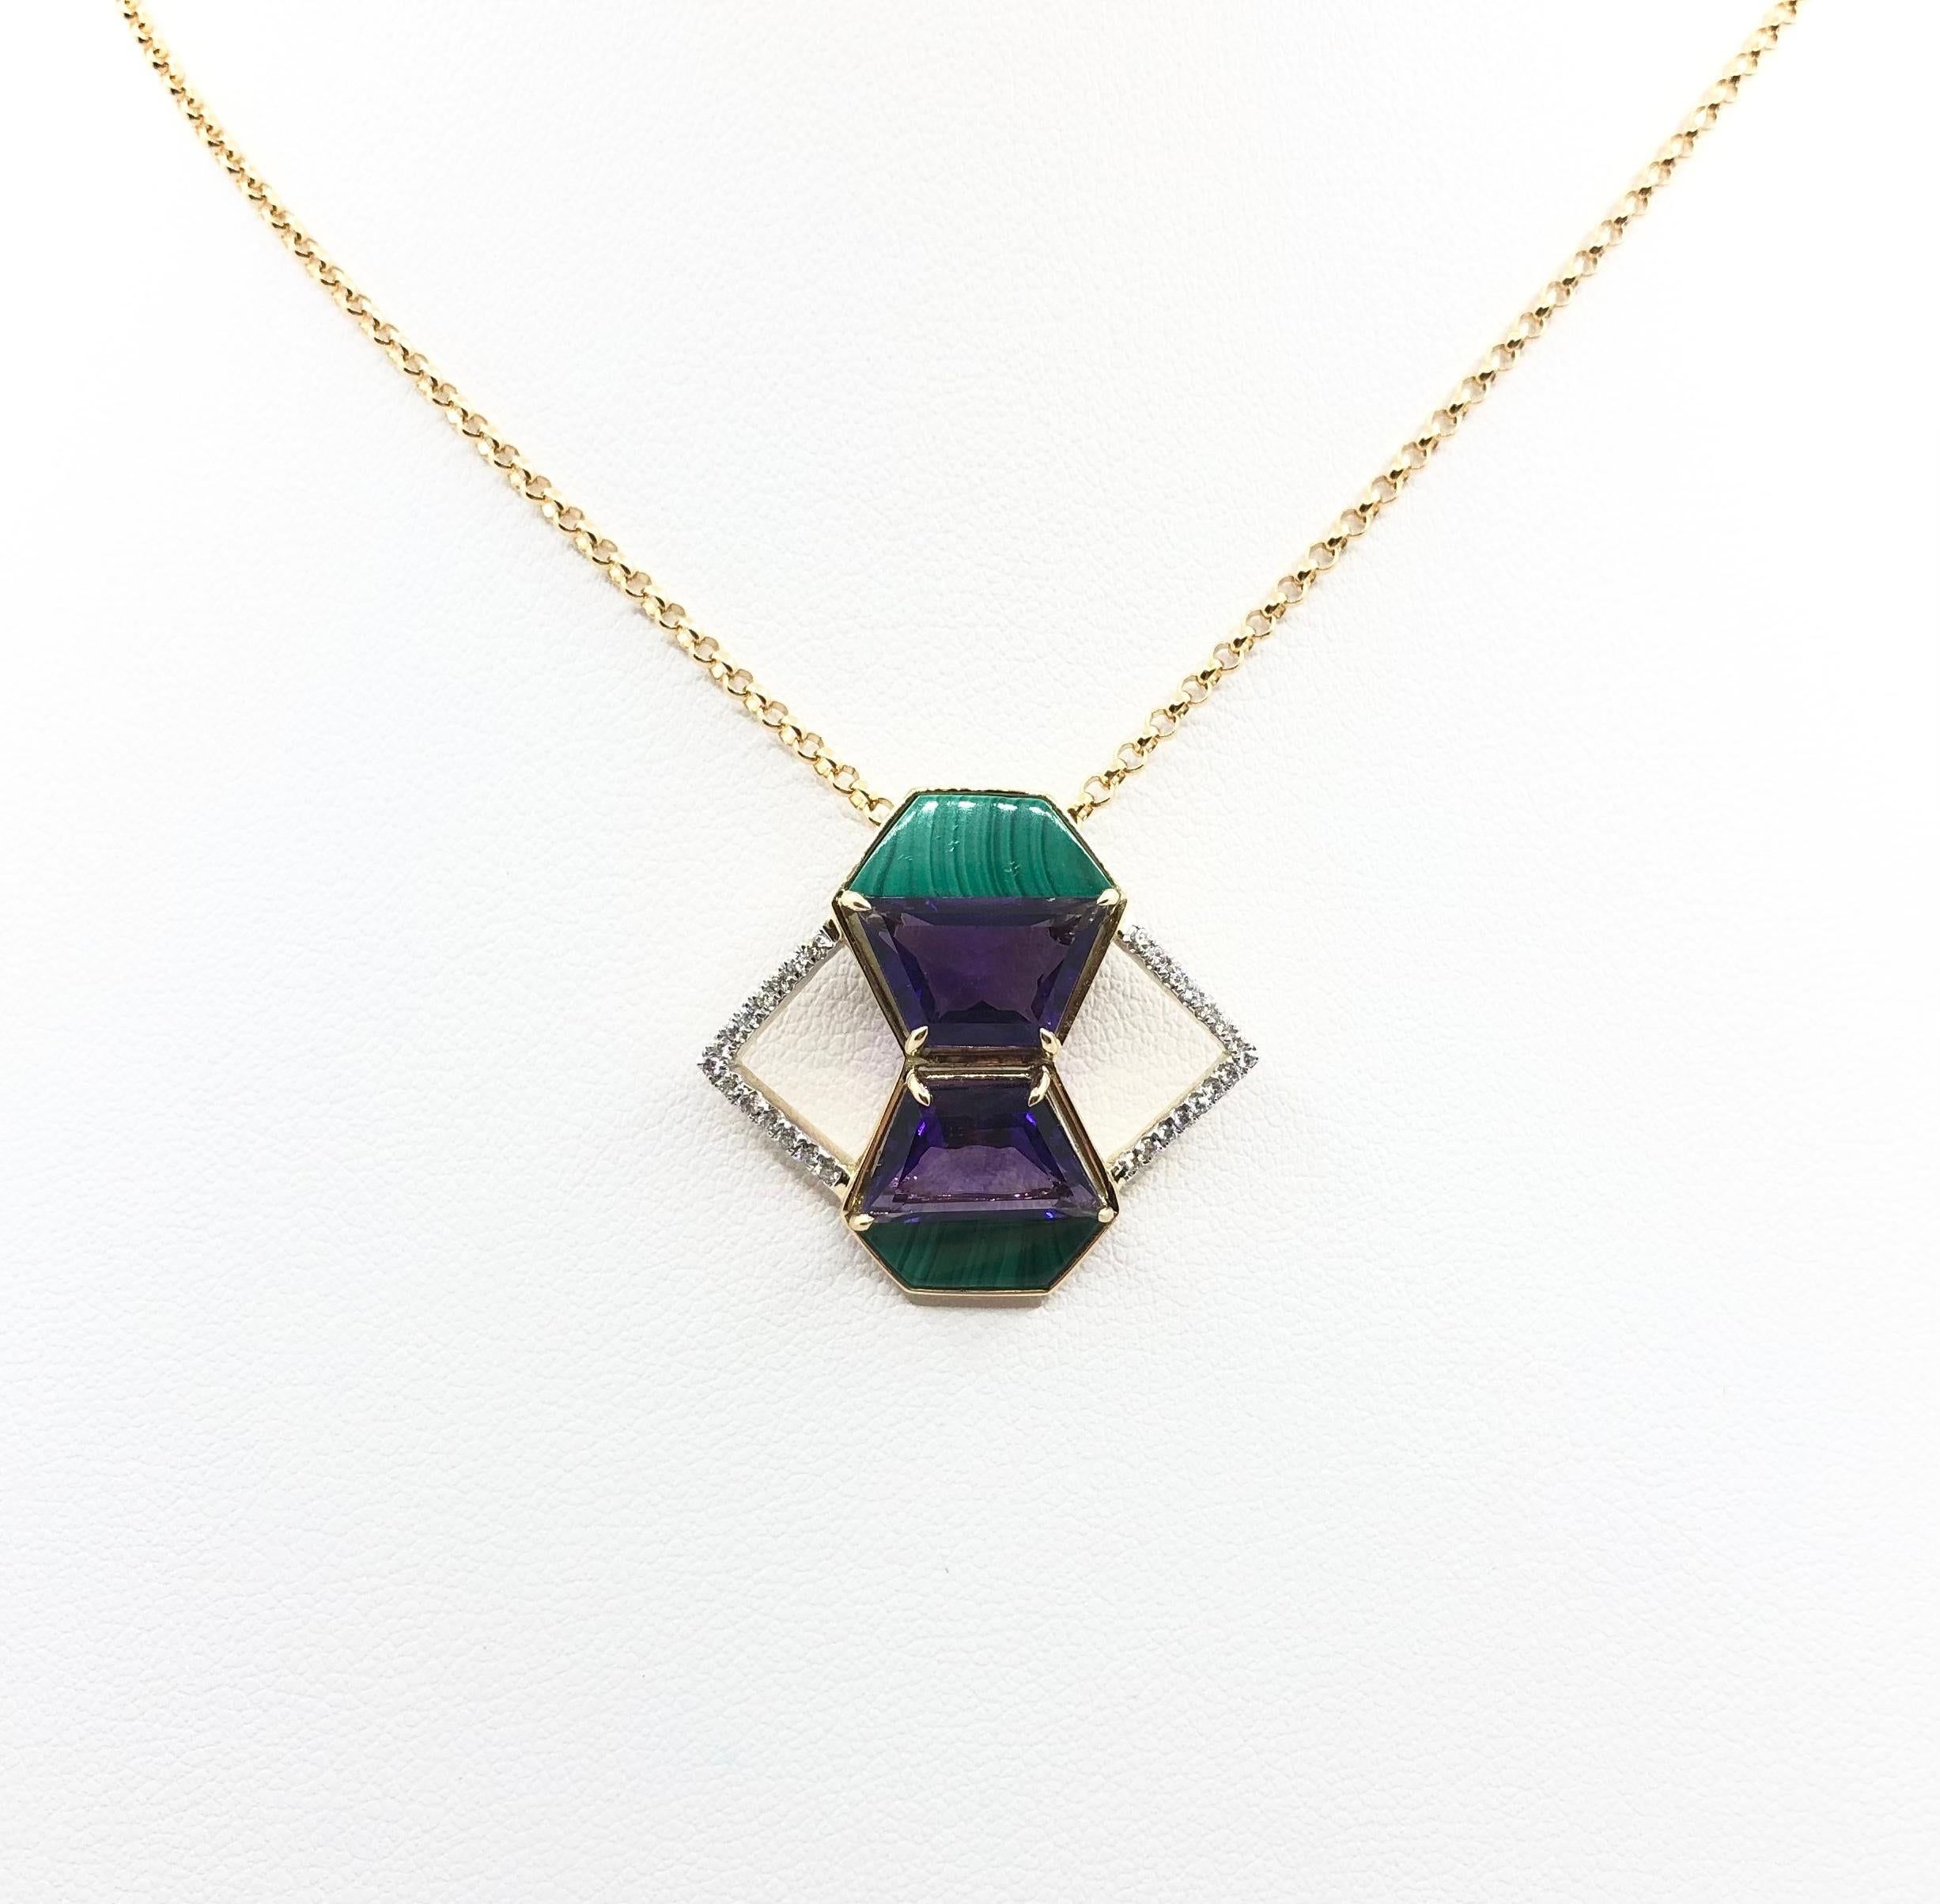 Amethyst 4.35 carats, Malachite and Diamond 0.14 carat Pendant set in 18 Karat Gold Settings
(chain not included)

Width: 2.7 cm 
Length: 2.5 cm
Total Weight: 4.57 grams

